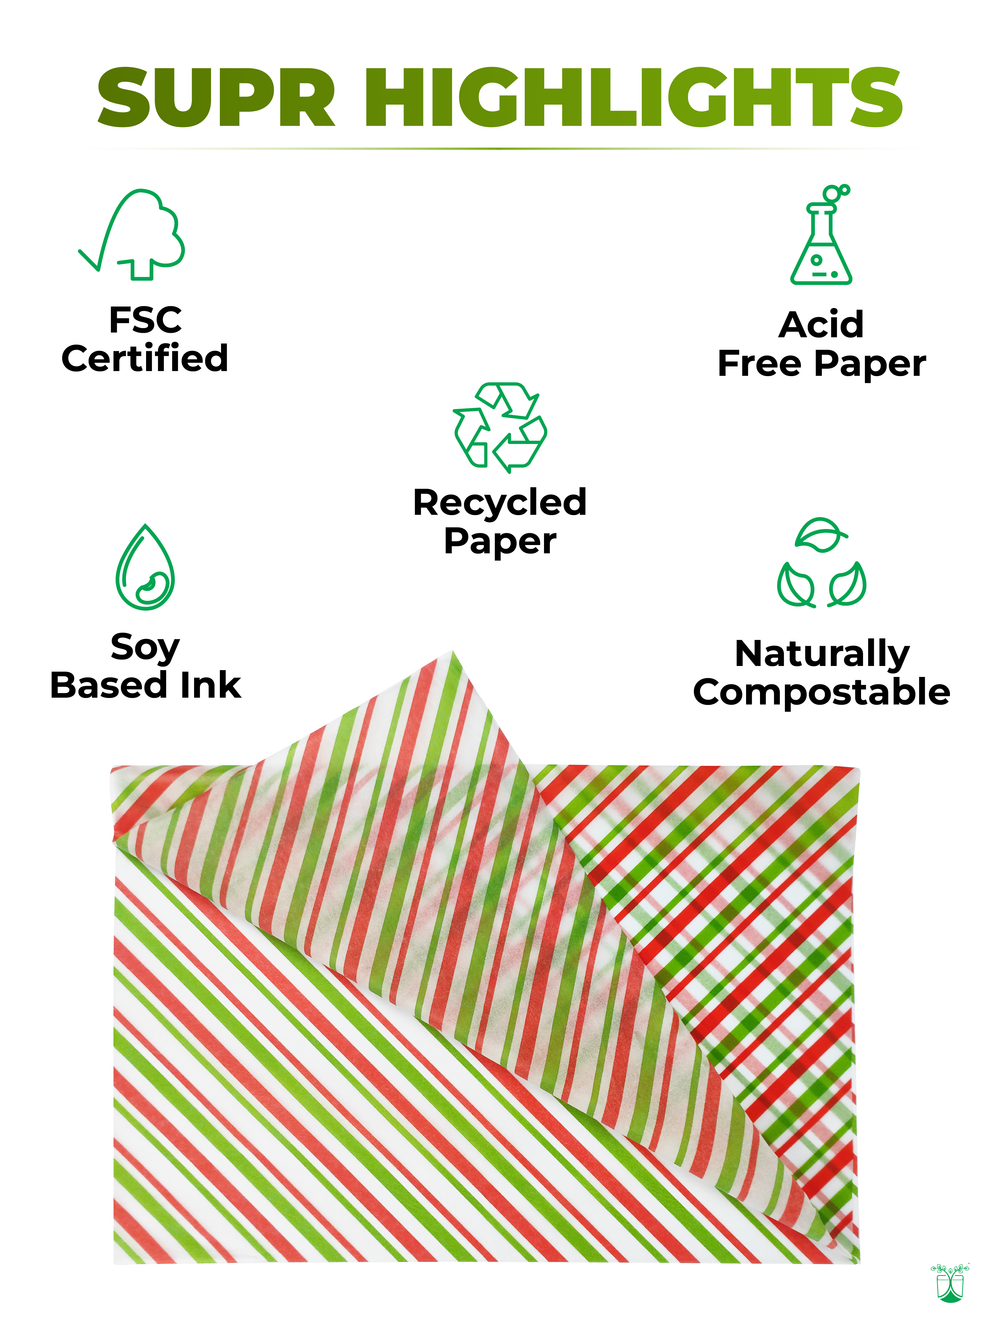 wrapping paper | tissue paper | custom wrapping paper | custom tissue paper | coloured tissue paper | tissue paper roll | design tissue paper | eco friendly tissue paper | compostable tissue paper | candy cane tissue paper